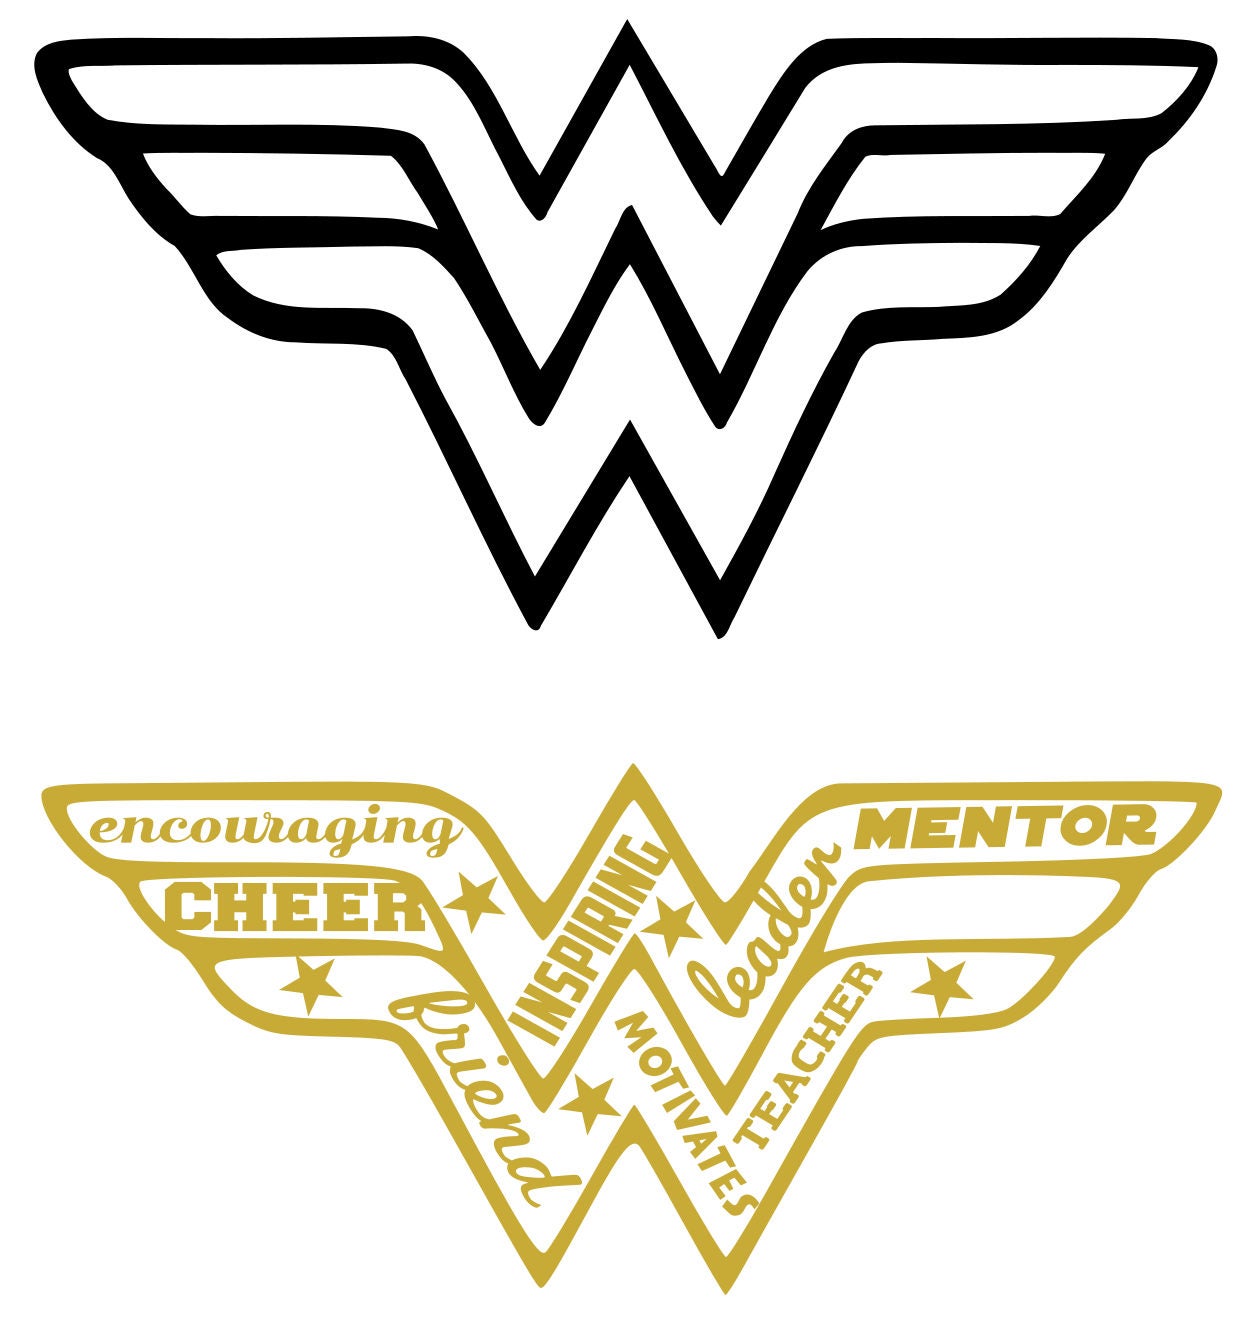 Download SVG Cut File Wonder Woman Cheer with blank space for Tshirt | Etsy